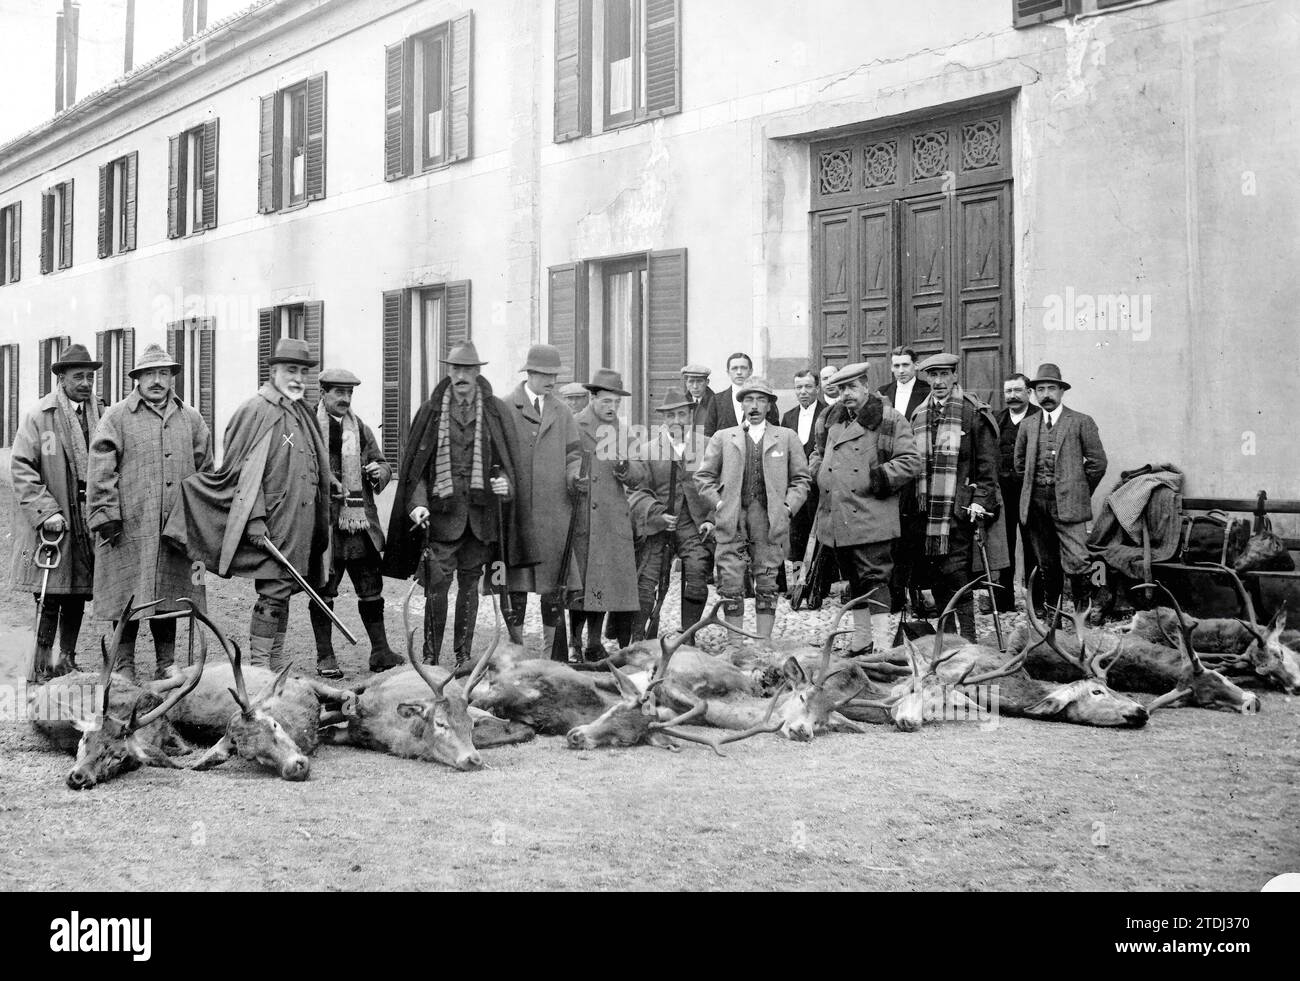 Albacete, 02/12/1911. Hunting in the Los Llanos possession, of the Marquis of Larios. The hunters returning from a cattle drive. From left to right; Mr. Leopoldo Larios, Count of Puerto, Mr. Antonio Maura, Marquis of Larios, Mr. José Creus, Count of Torrubia, Mr. Alfonso Franco, Don Joaquín Caro, Marquis of Monteagudo, Duke of Bayonne and Count of Artaza. Credit: Album / Archivo ABC / Collado Stock Photo